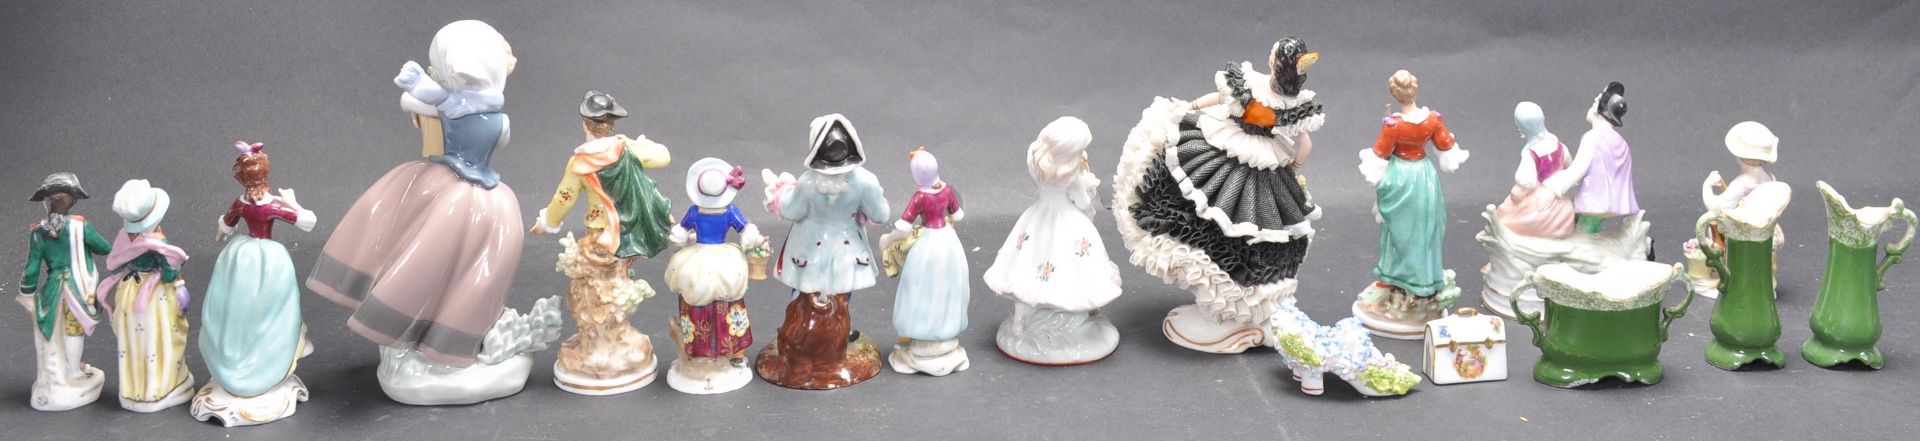 LARGE COLLECTION OF EARLY 20TH CENTURY CONTINENTAL FIGURINES - Image 3 of 6